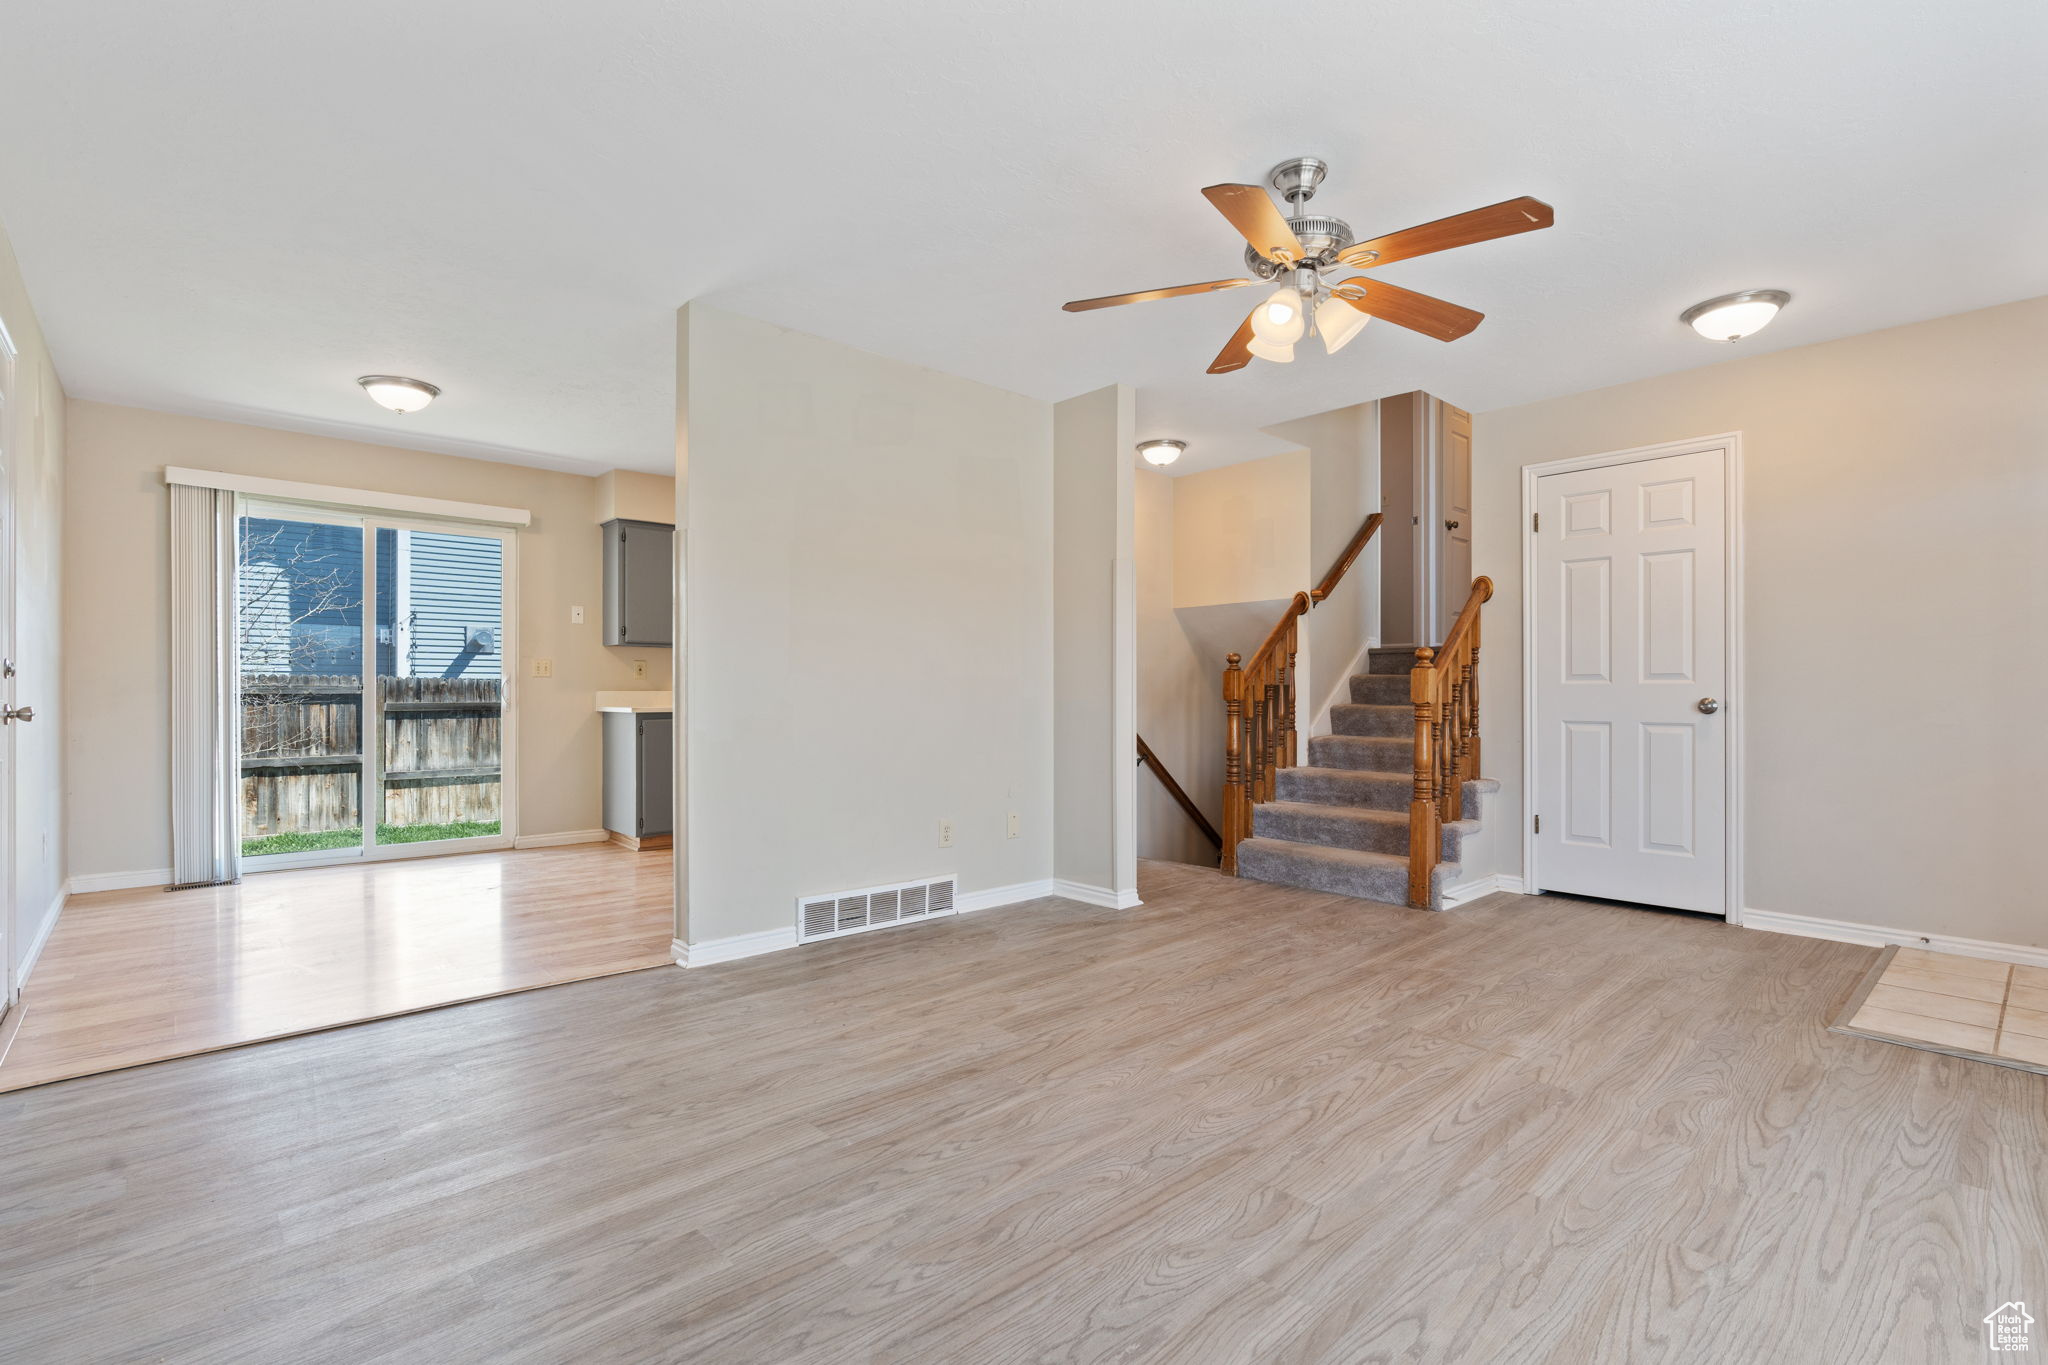 Interior space featuring ceiling fan and light hardwood / wood-style floors